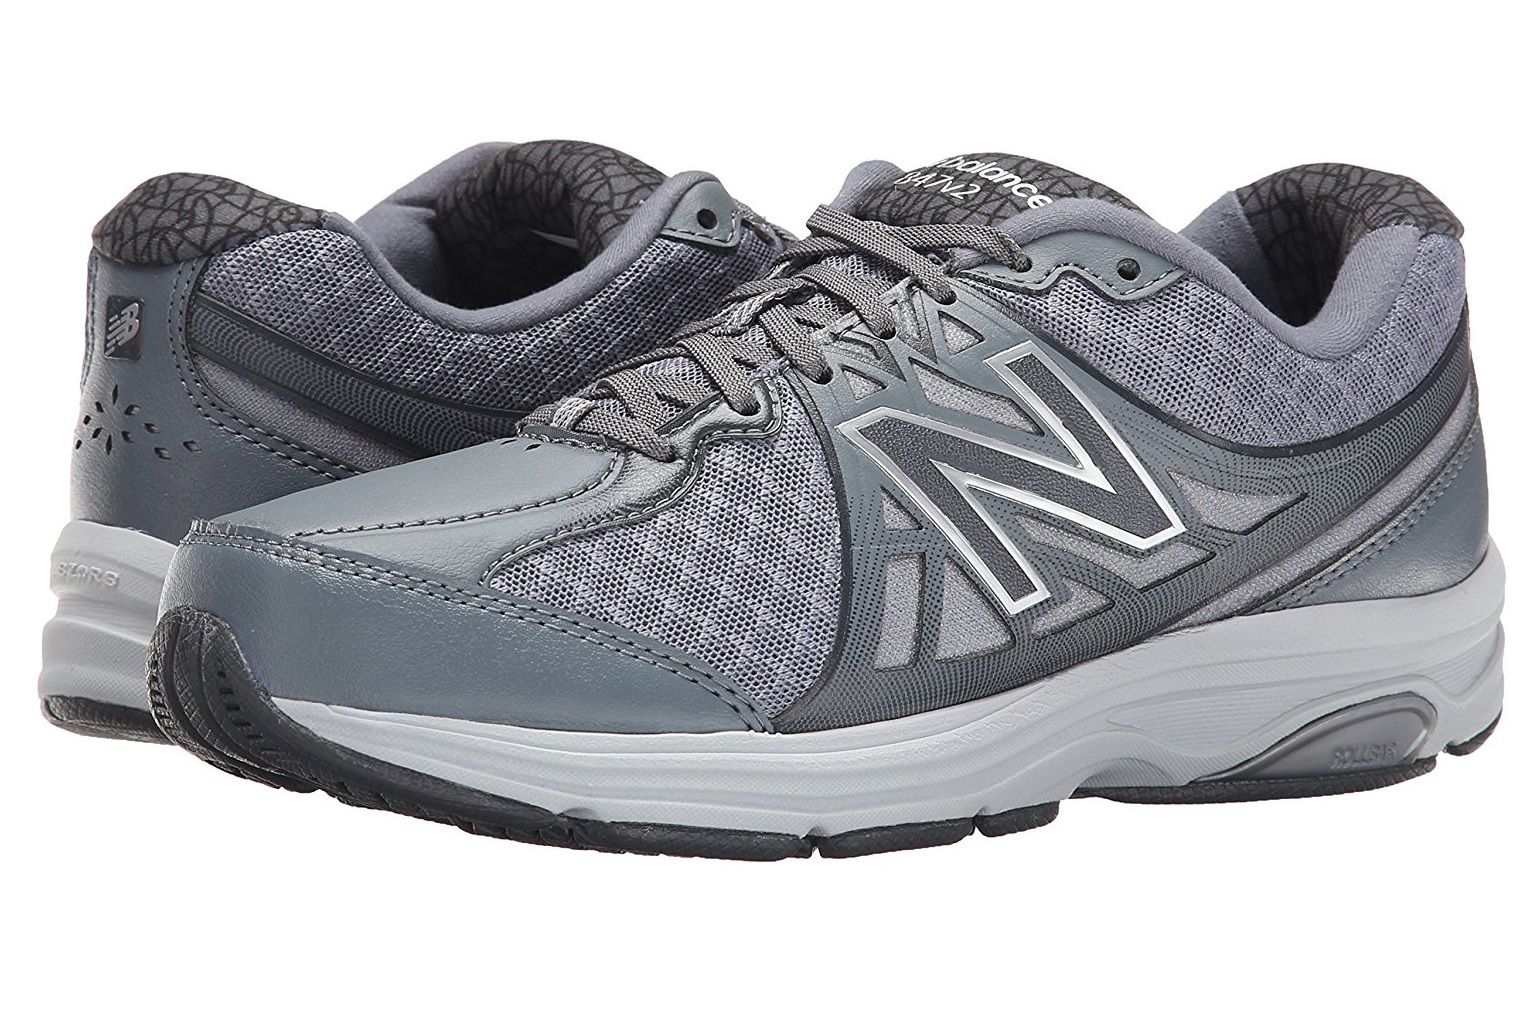 Stability Shoes Top Picks for Walkers